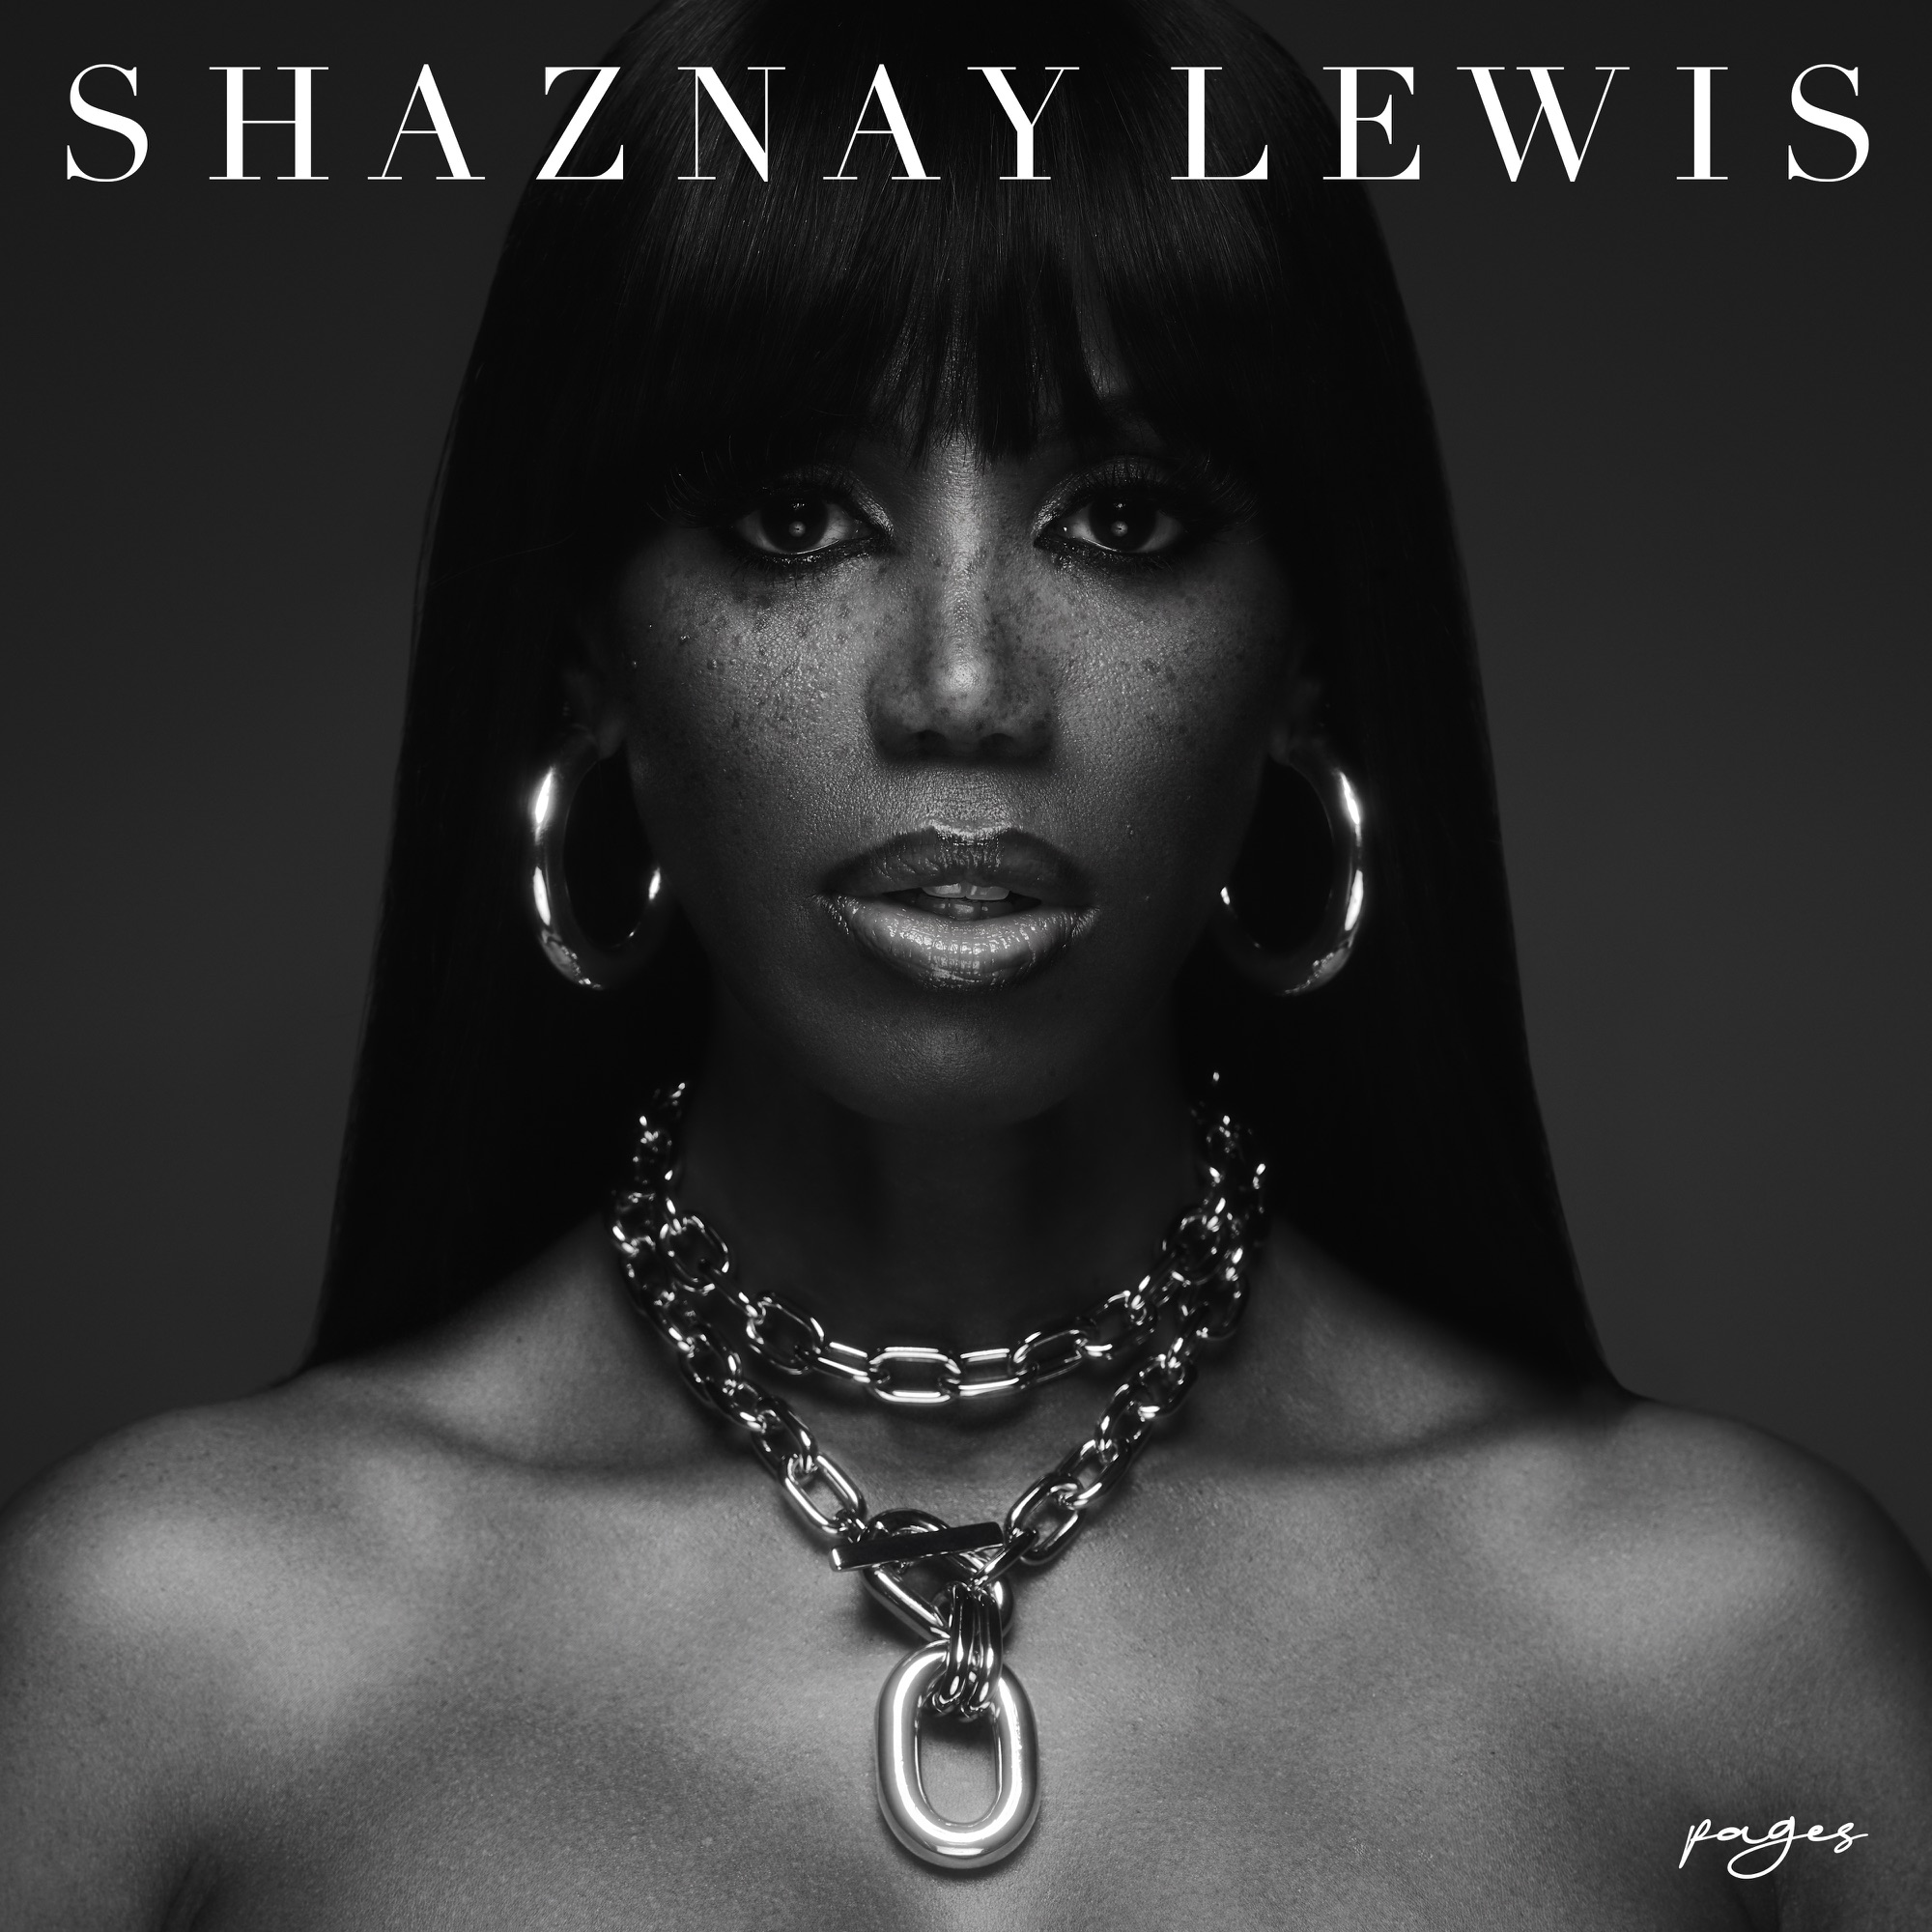 Shaznay Lewis — Pages cover artwork